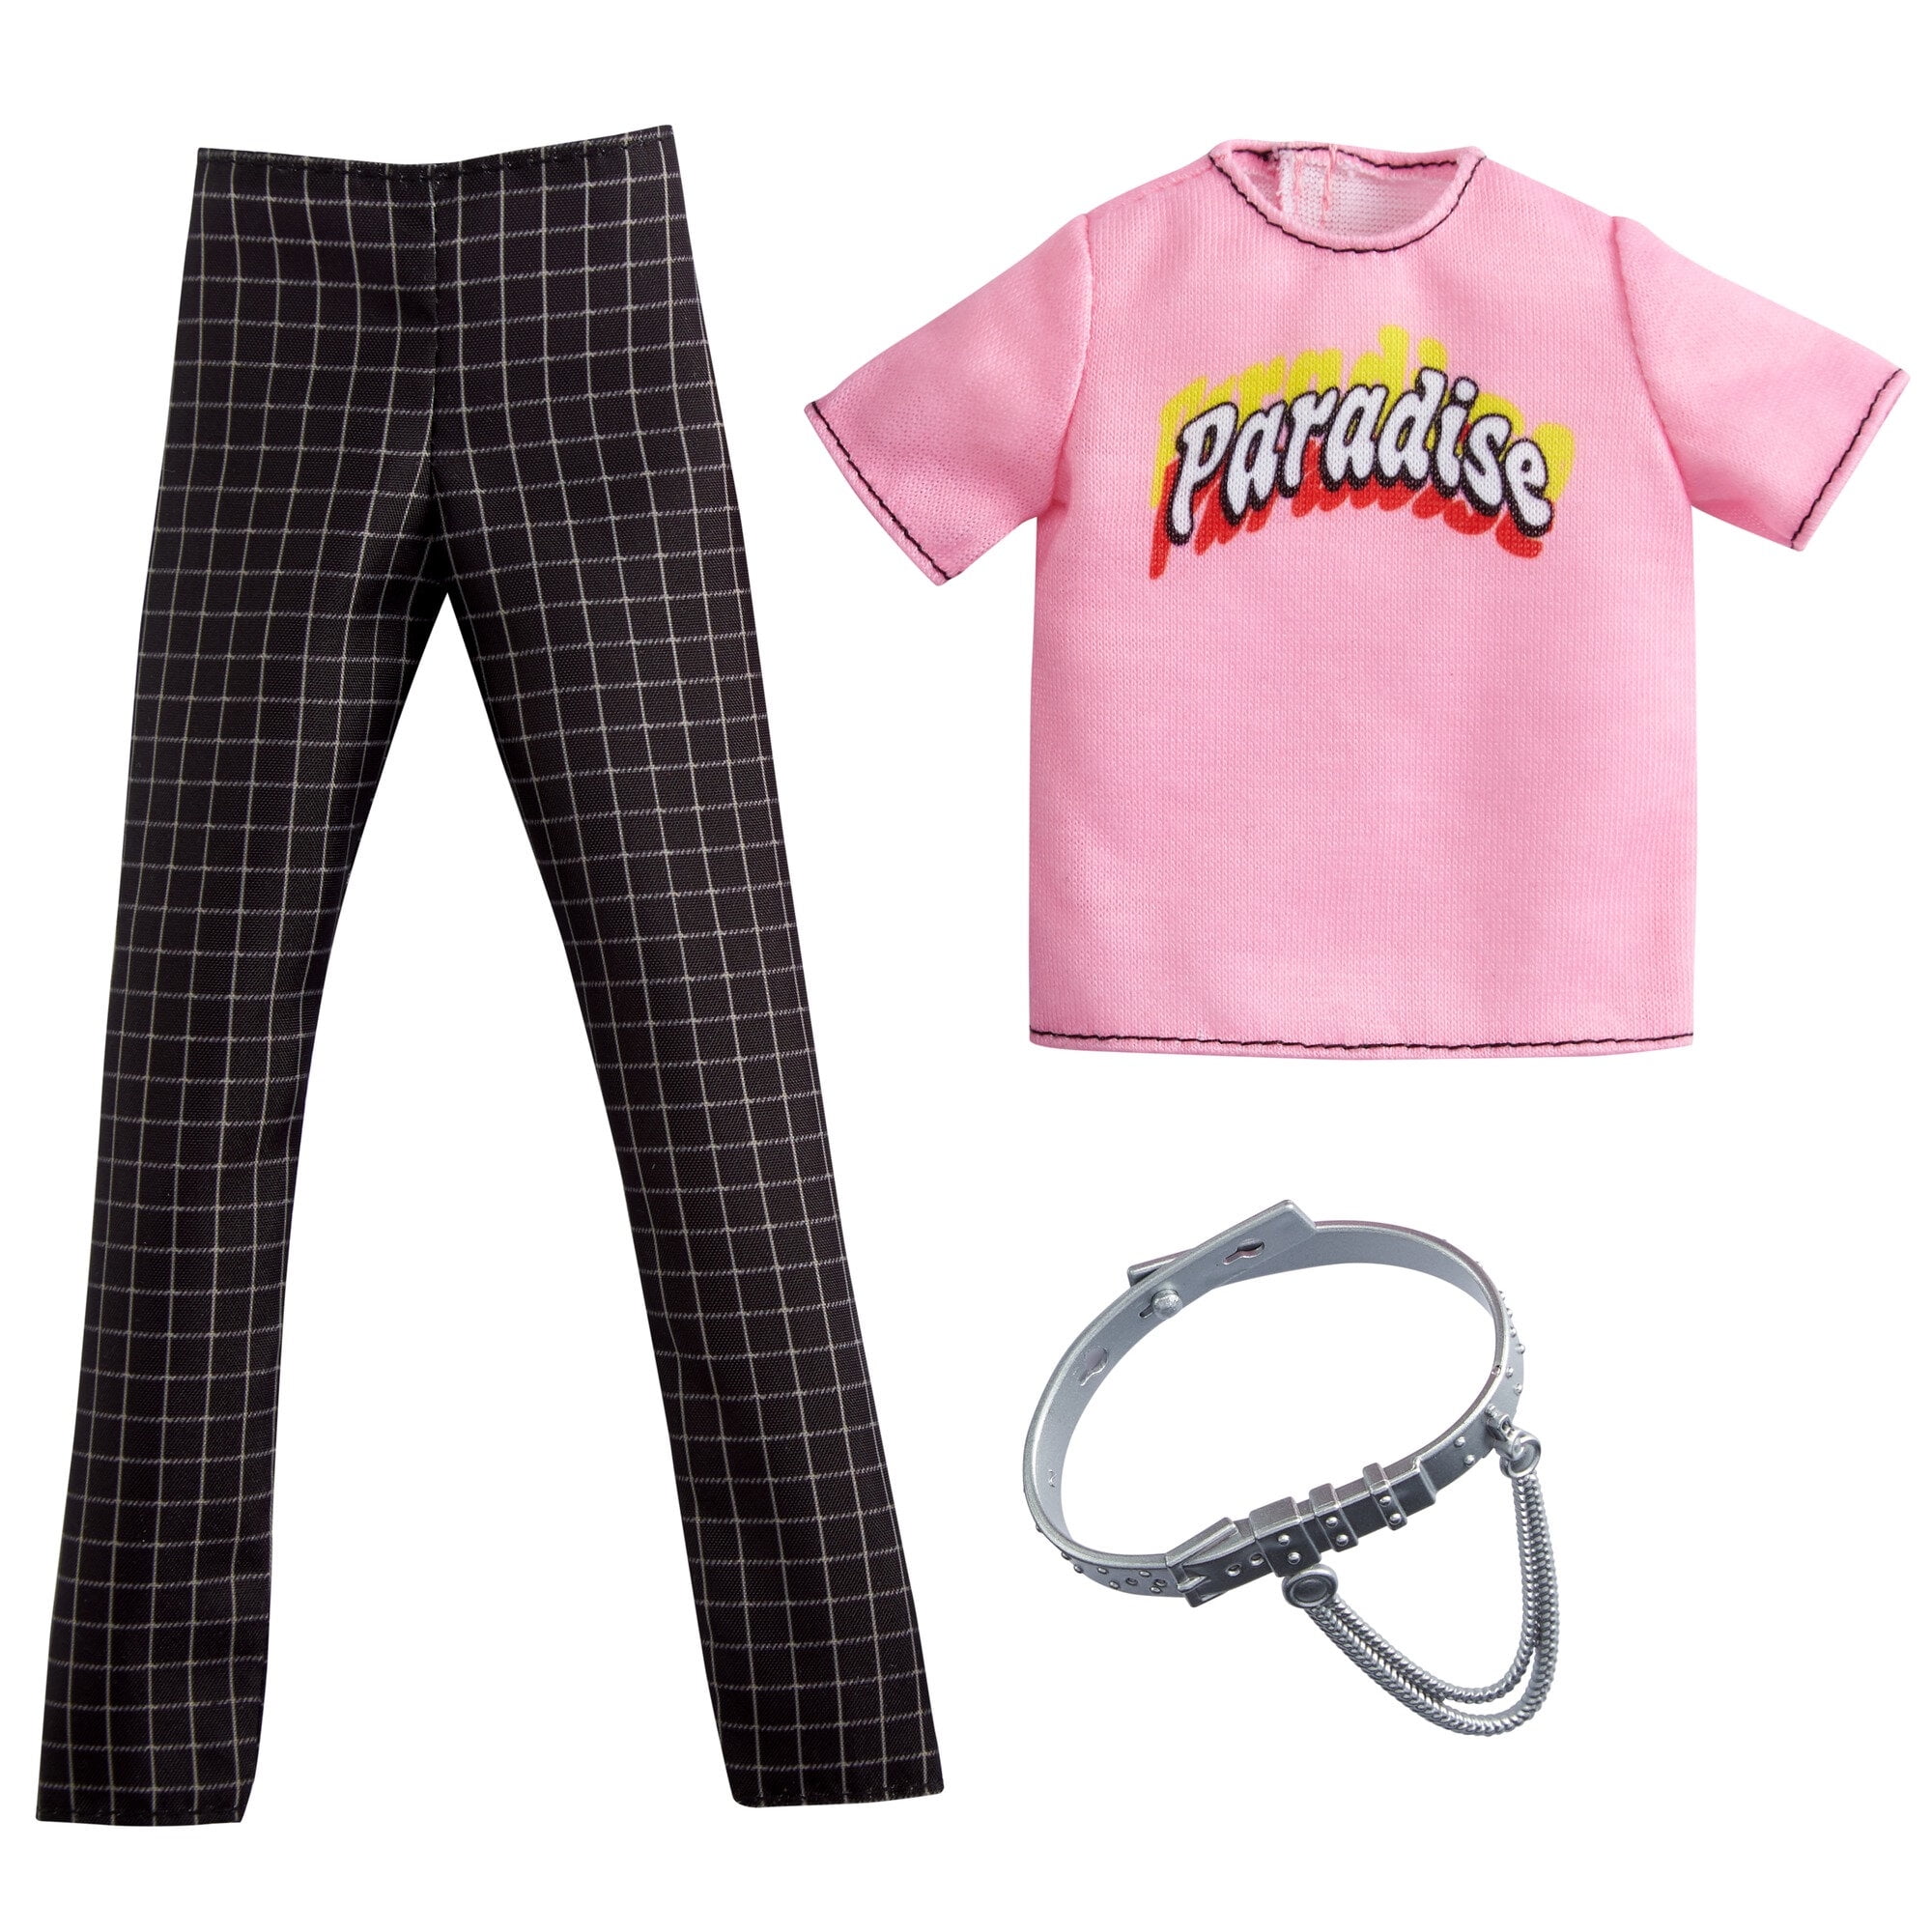 Barbie Fashions Pack: Ken Doll Clothes with Pink “Paradise” Top, Checked & Chain Belt - Walmart.com